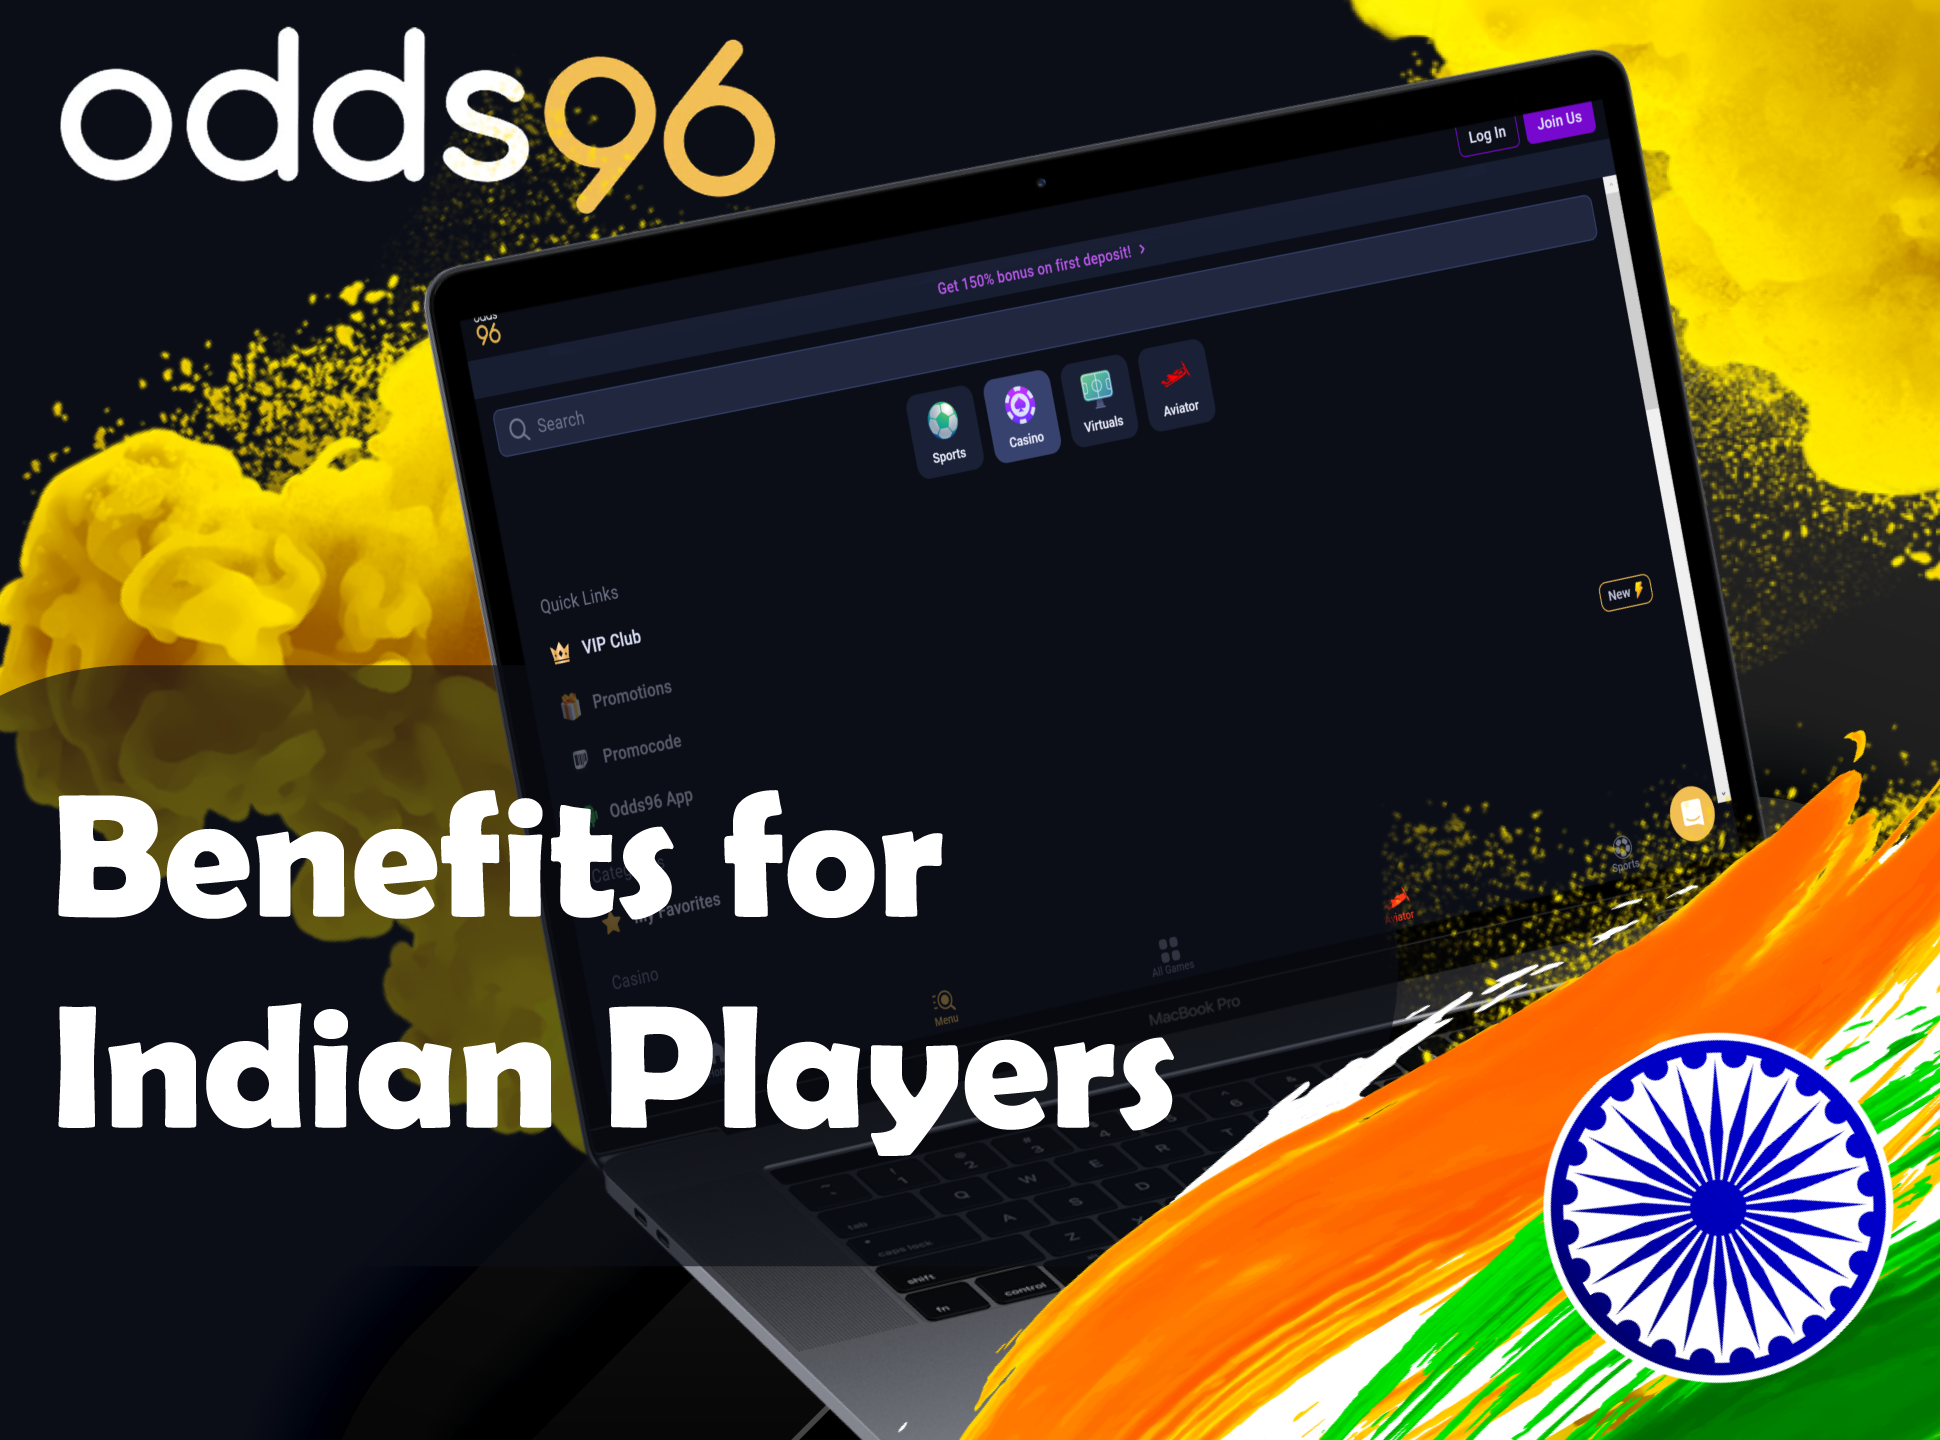 Get your special Odds96 bonus if you bet from India.